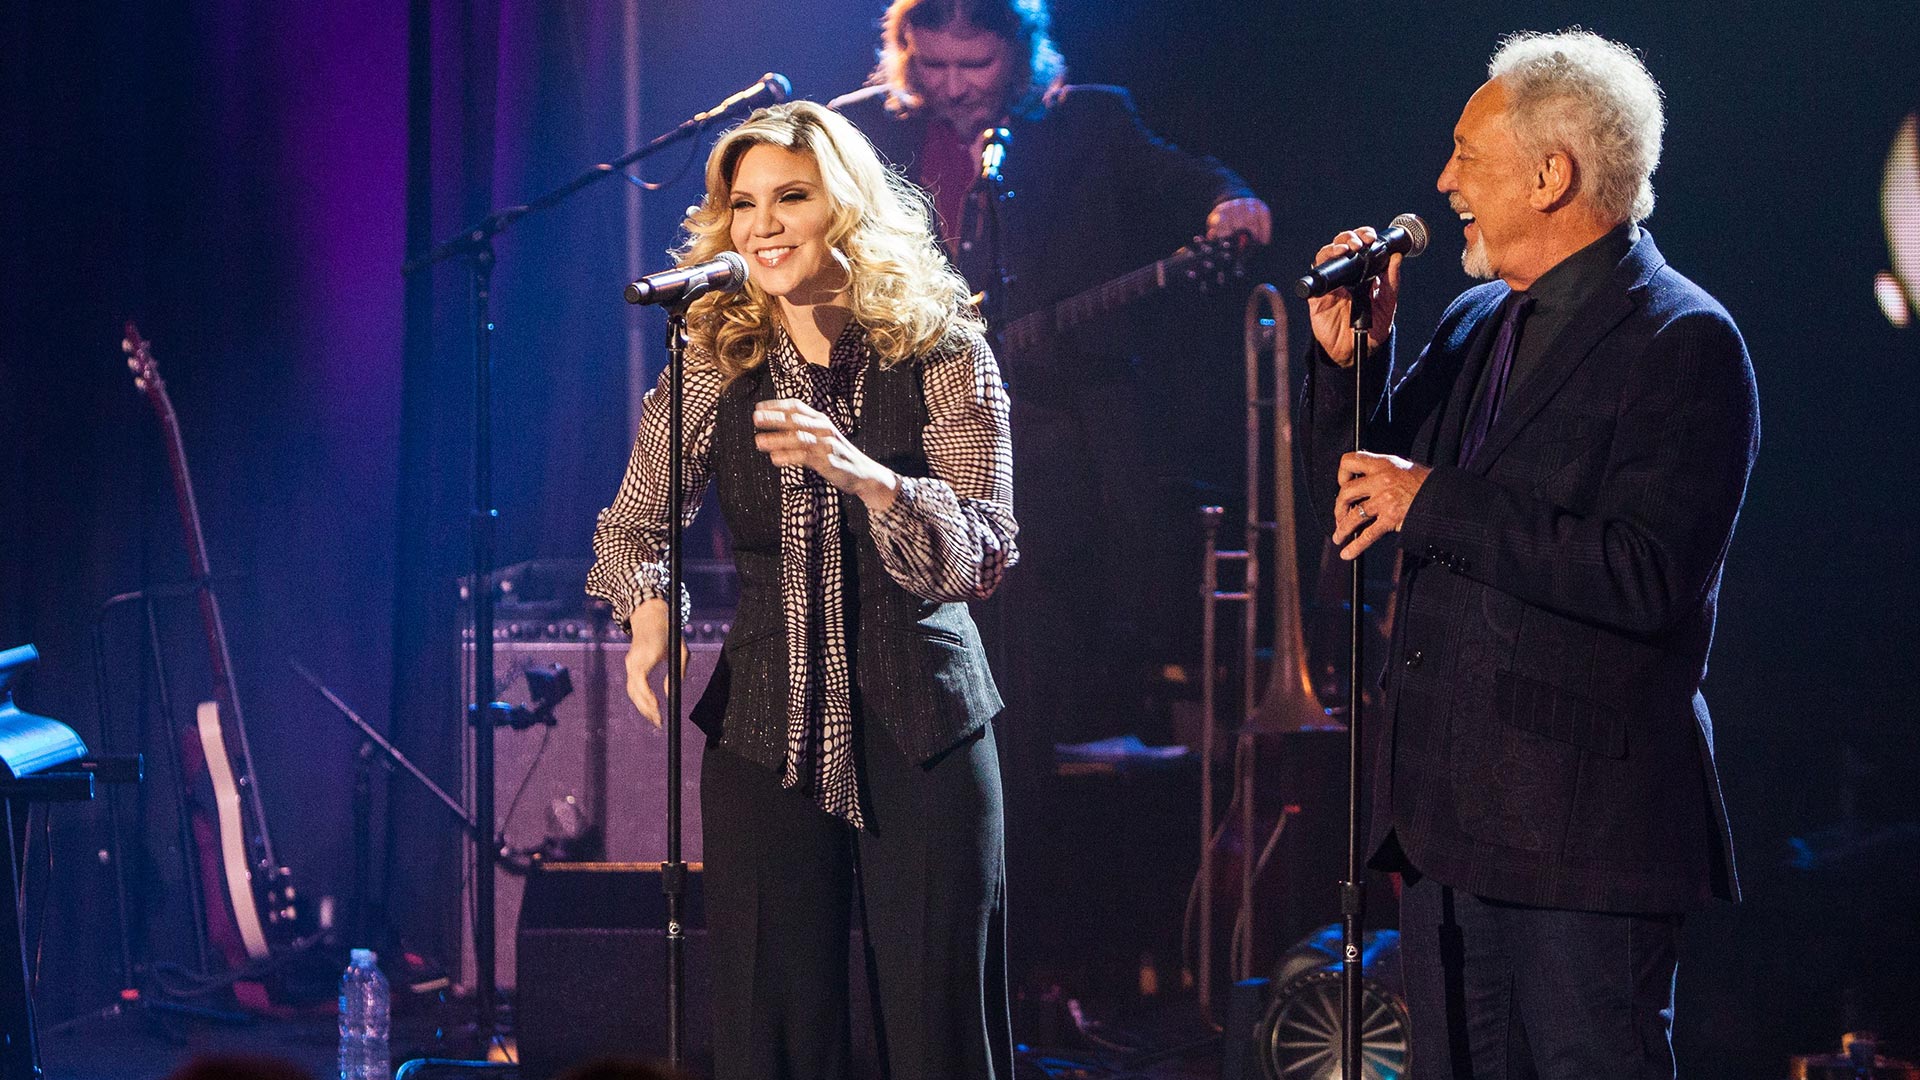 Special guest Alison Krauss joins Tom Jones in this SOUNDSTAGE special.